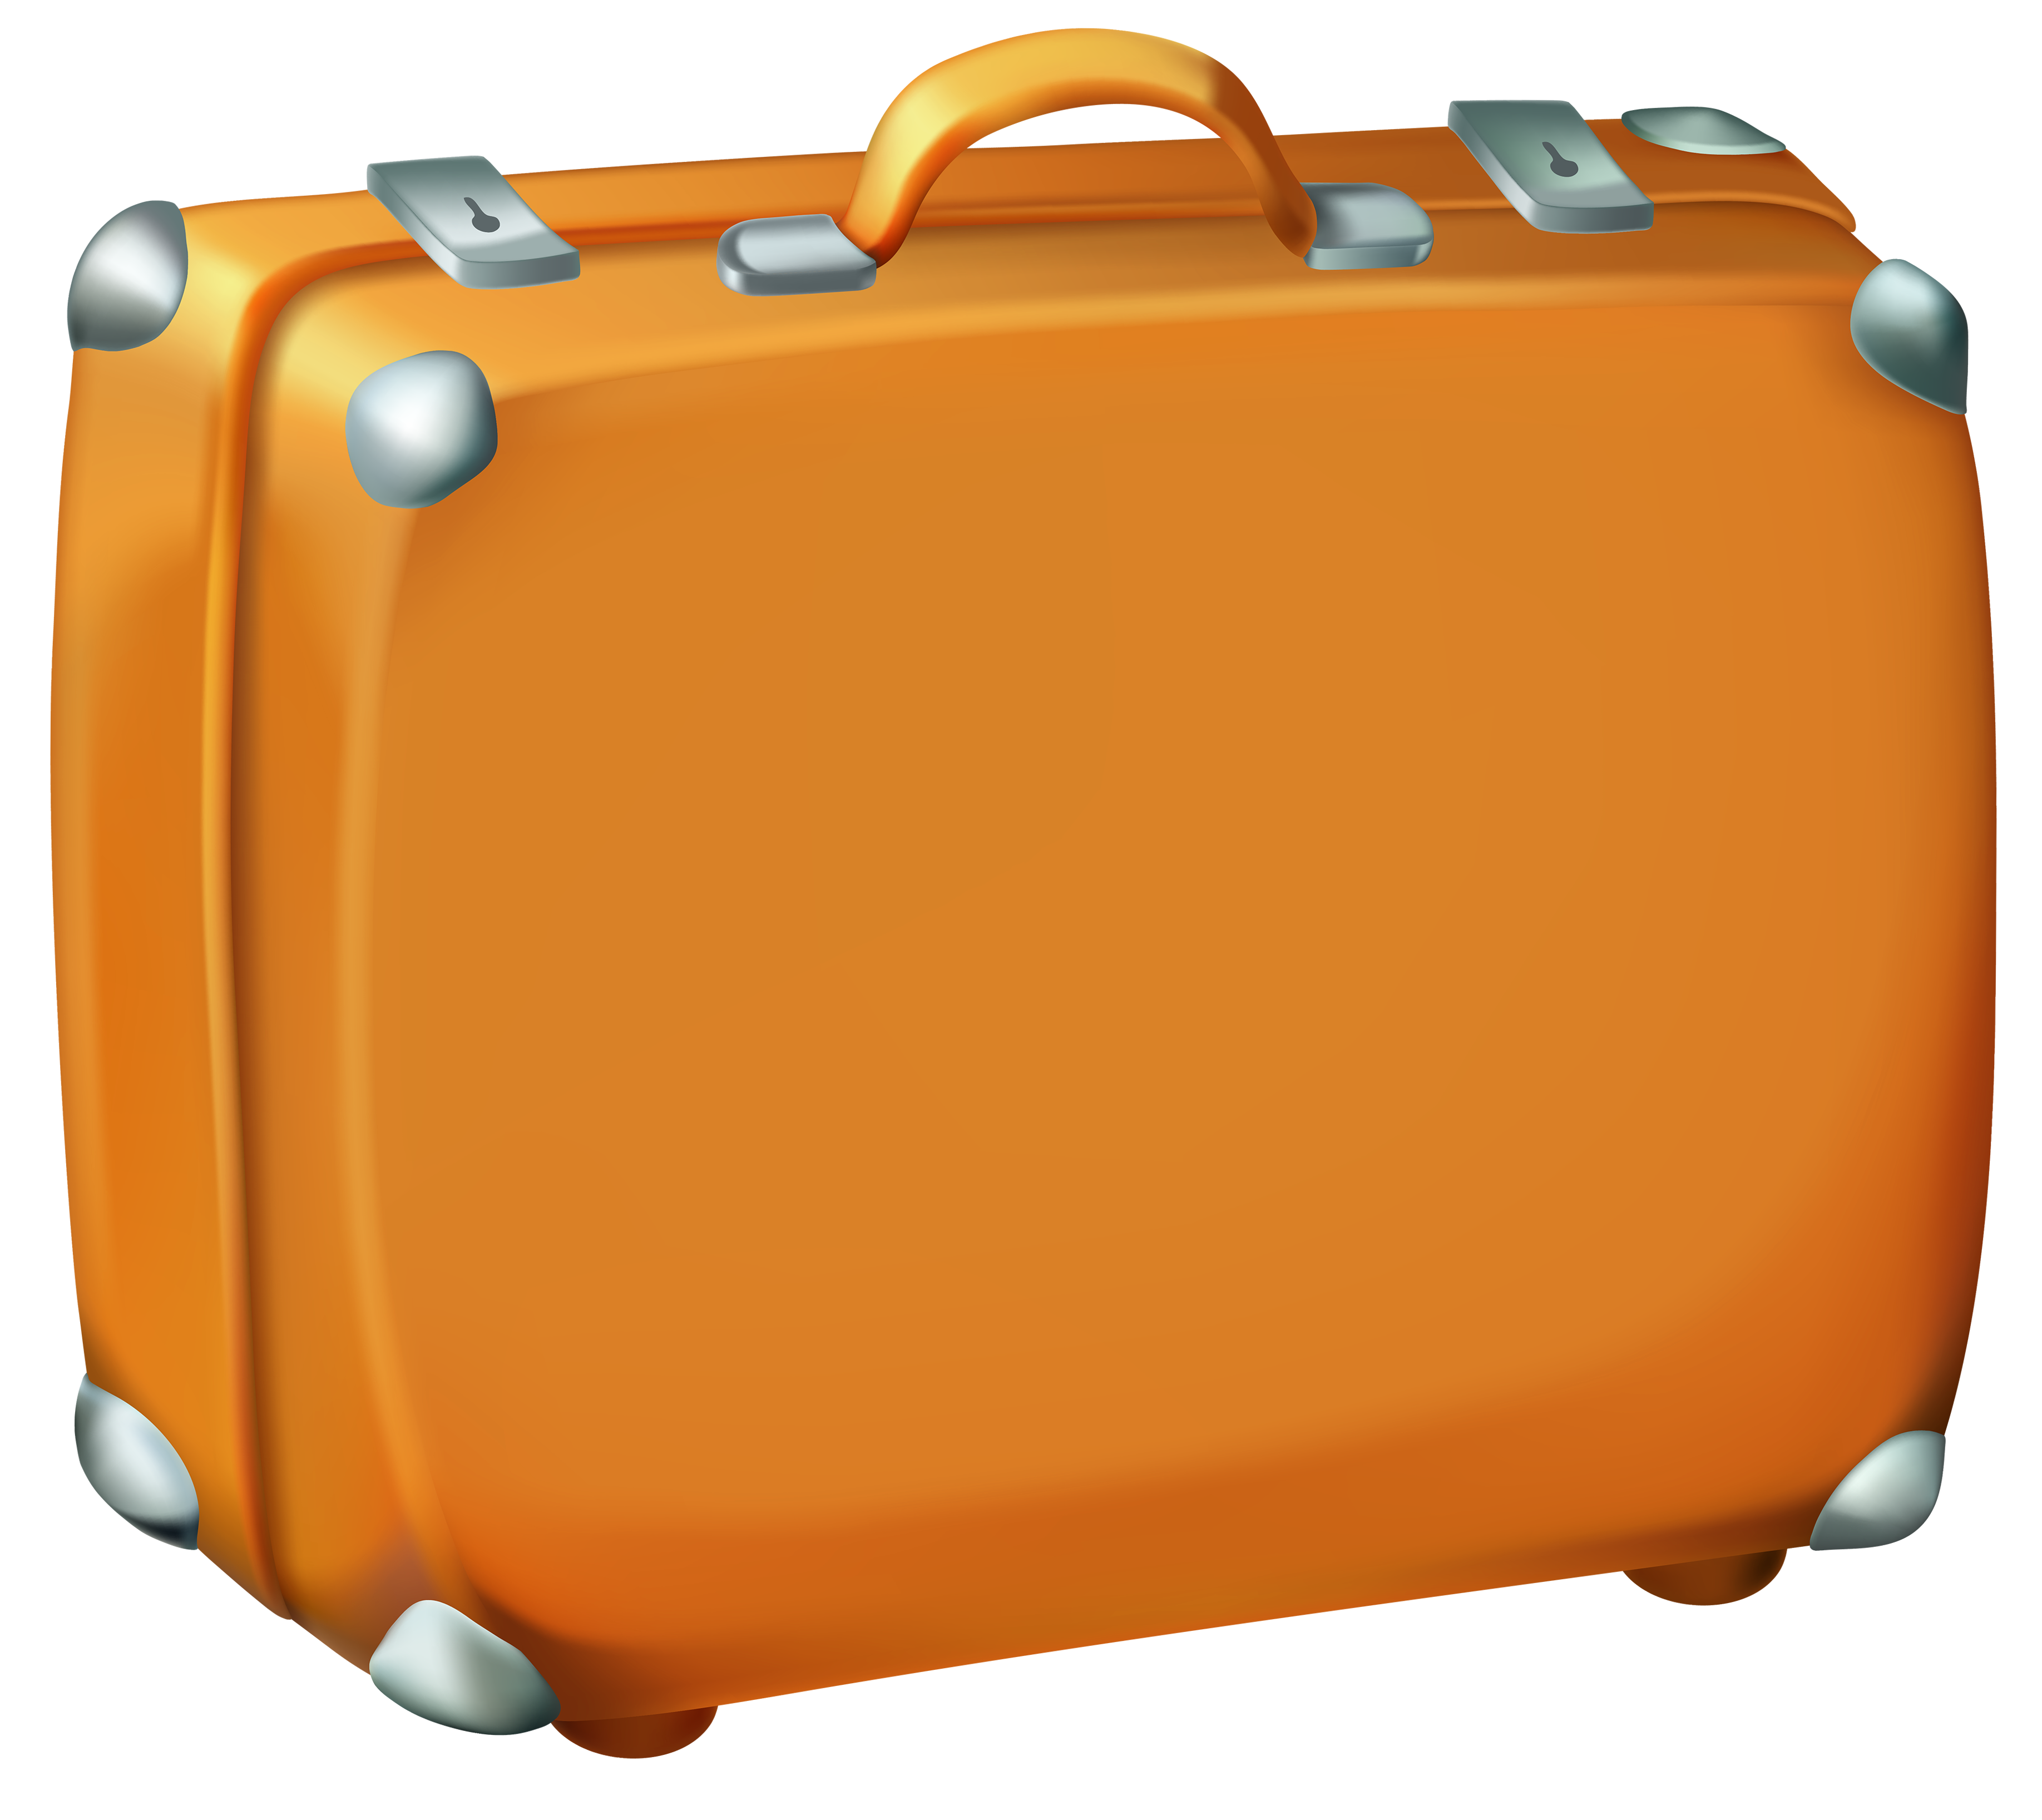 Free Cliparts Travel Luggage, Download Free Clip Art, Free.